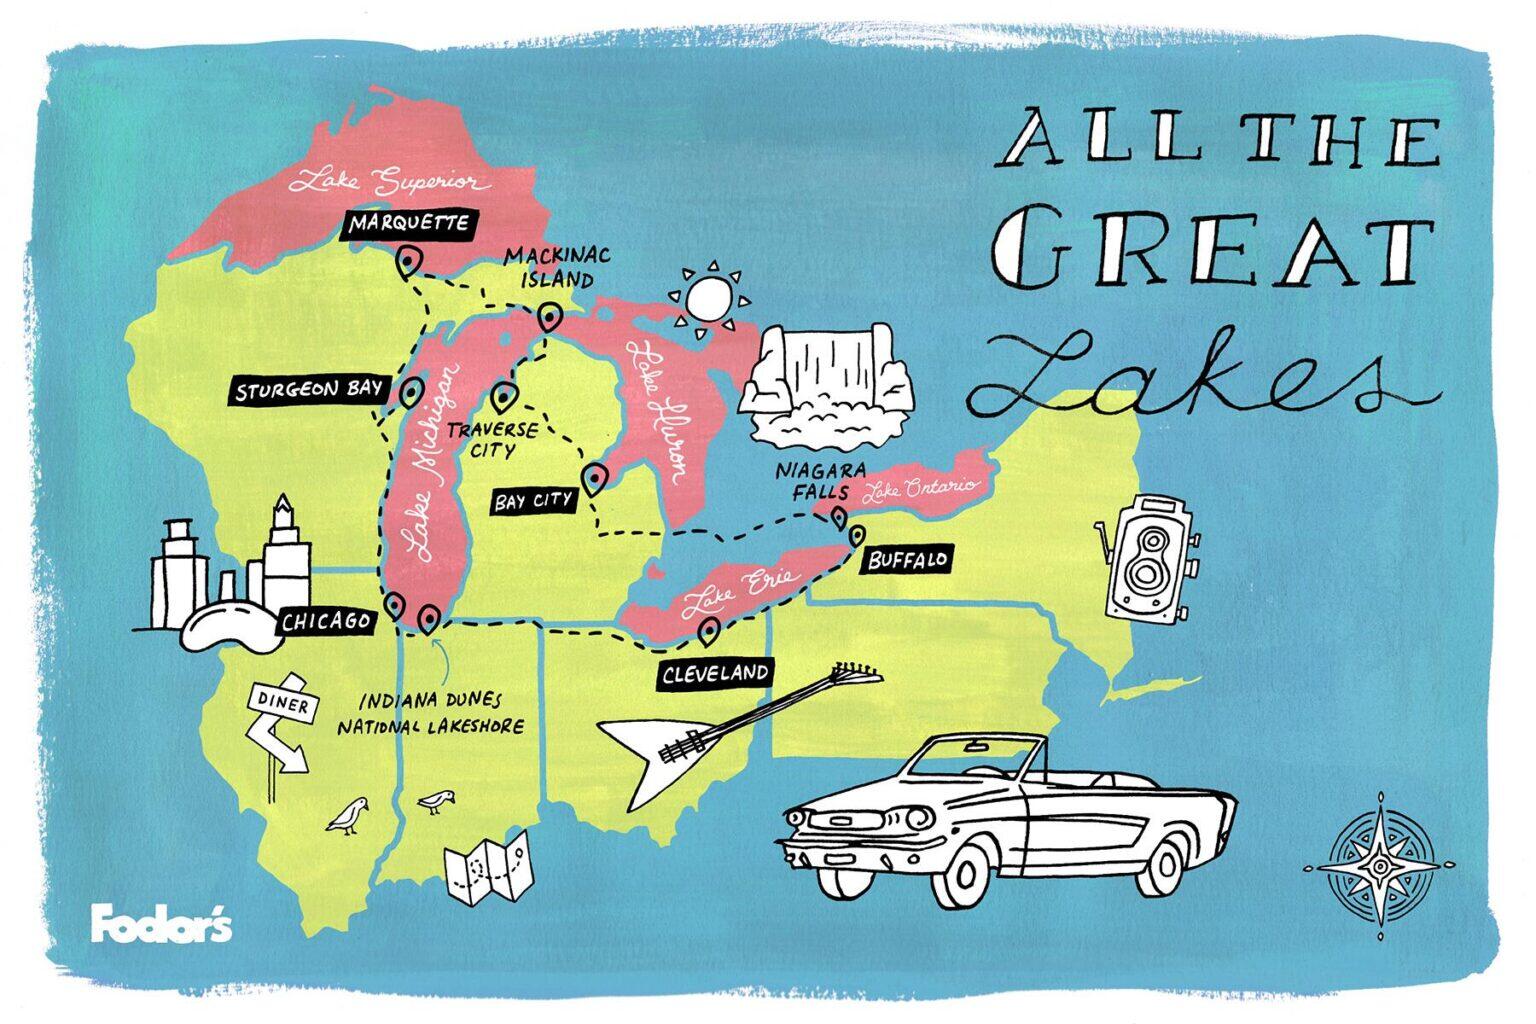 Road Trip Itinerary A Trip To All The Great Lakes